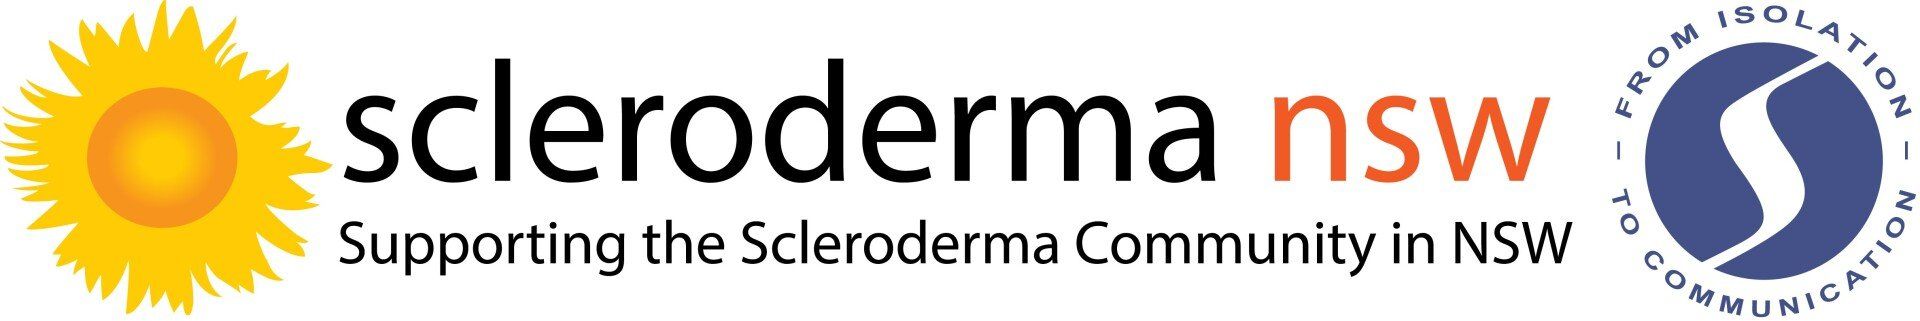 The Scleroderma Association of NSW Inc.